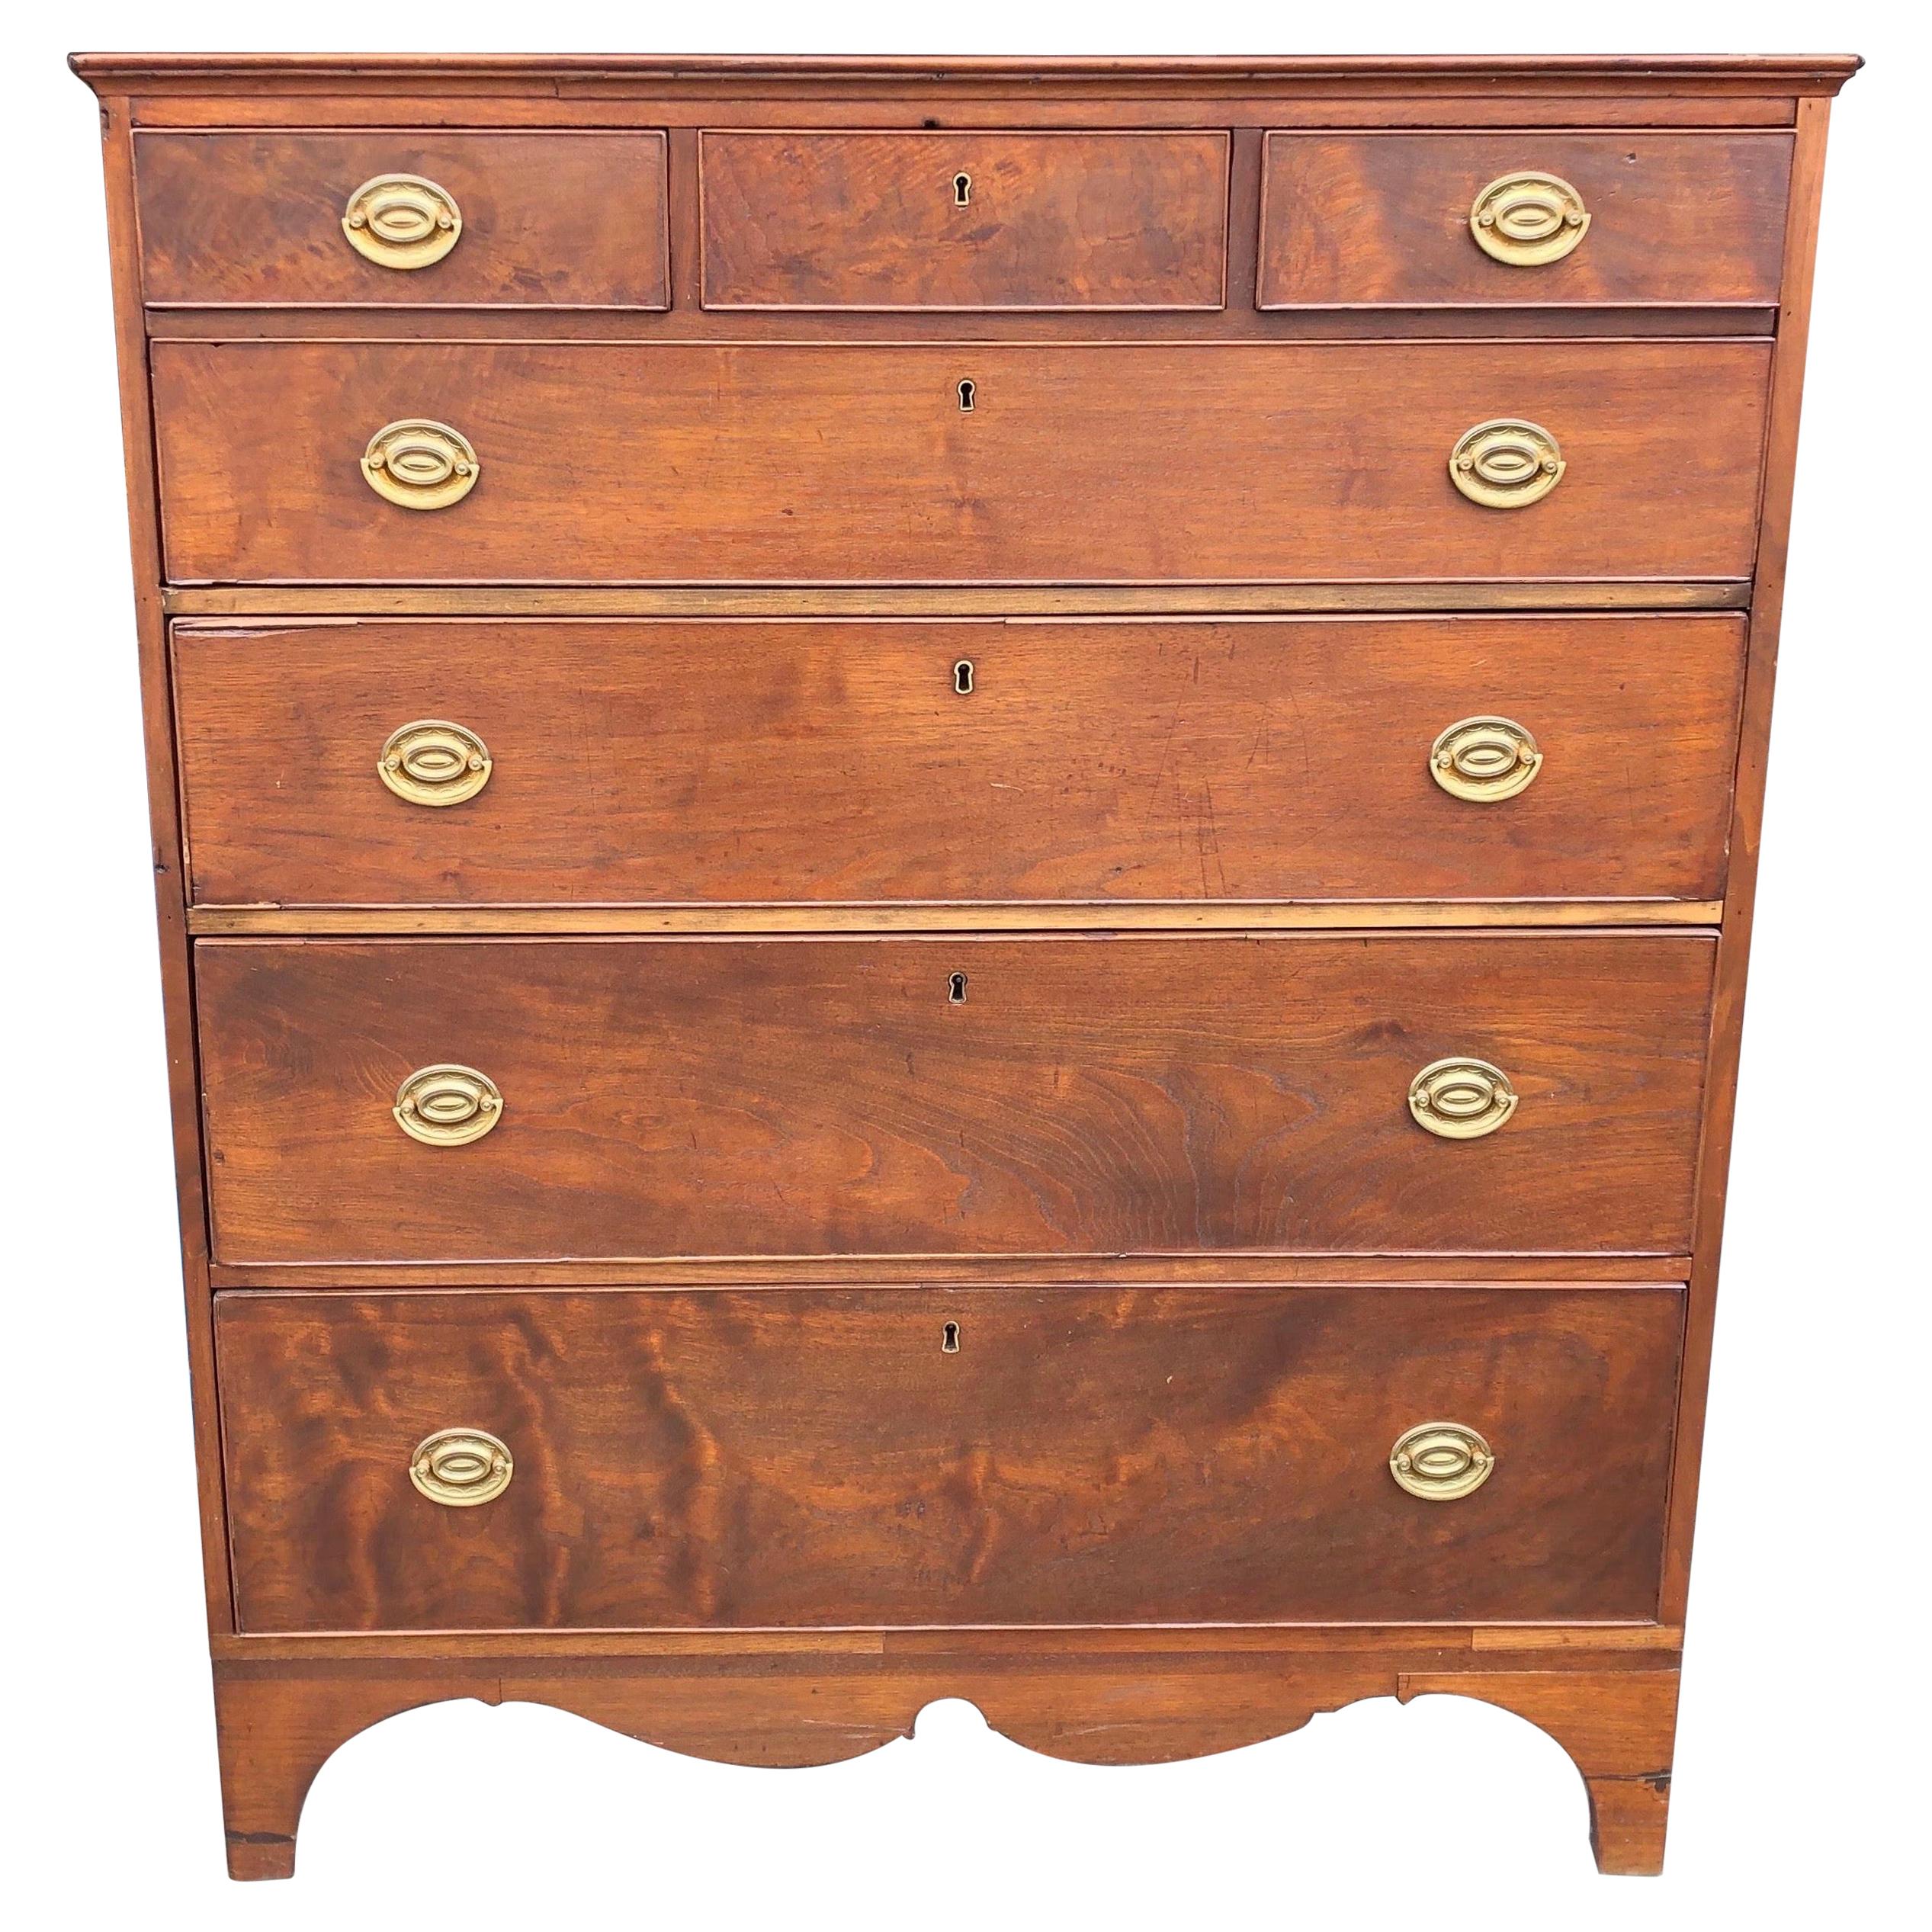 Early 19th Century North Carolina Chest of Drawers Made of Walnut